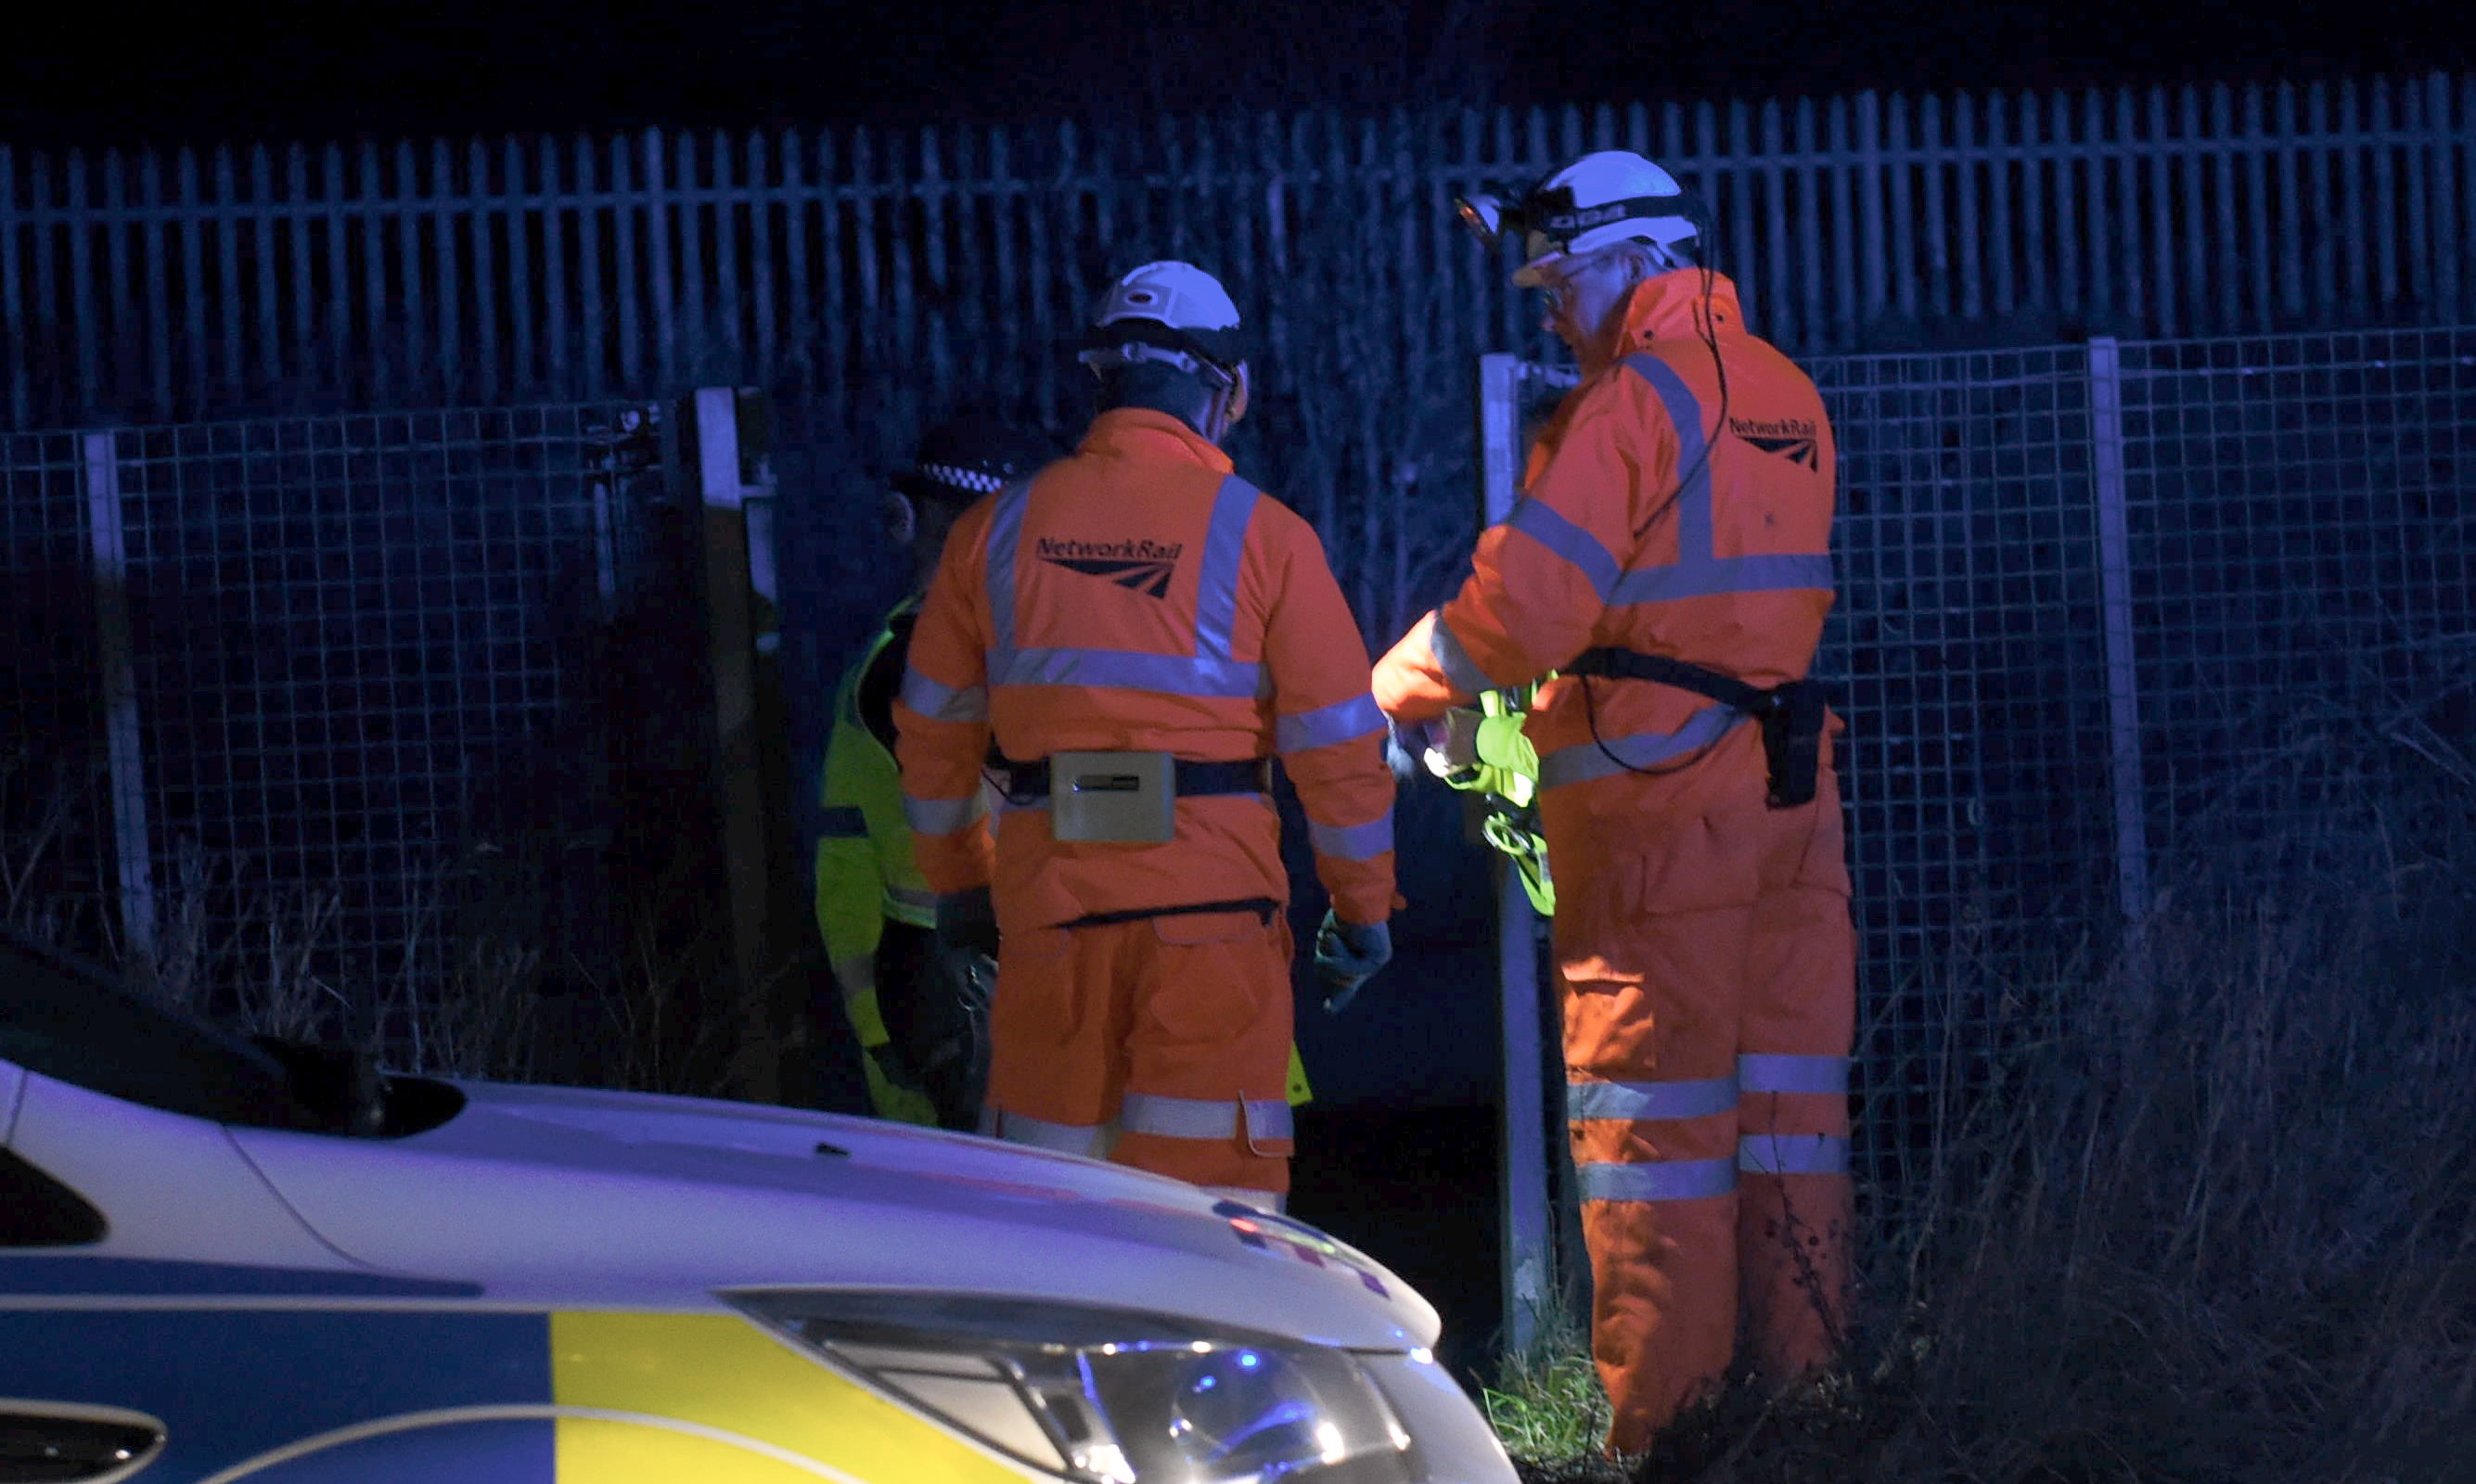 A person was killed after being struck by a train near Nigg, Aberdeen.